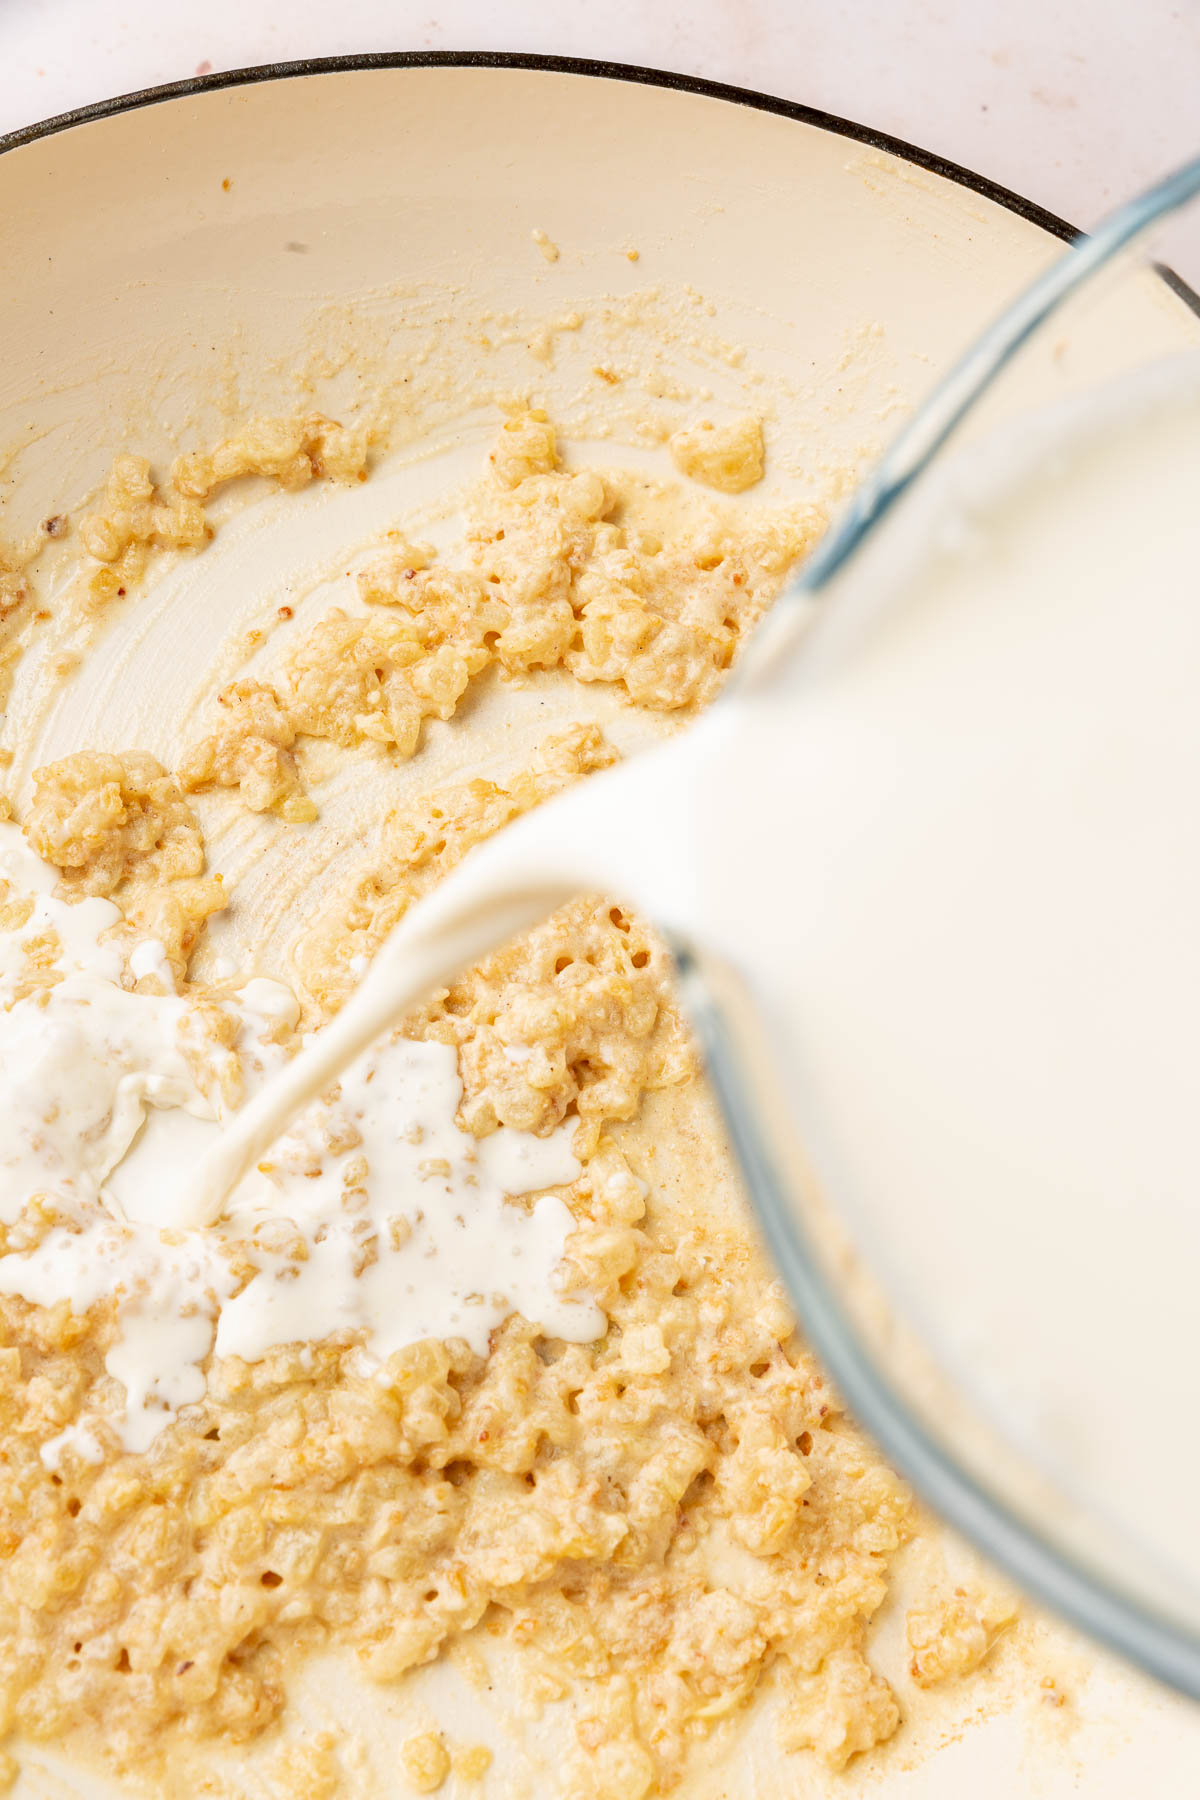 A glass measuring cup pouring heavy cream into a gluten-free roux.